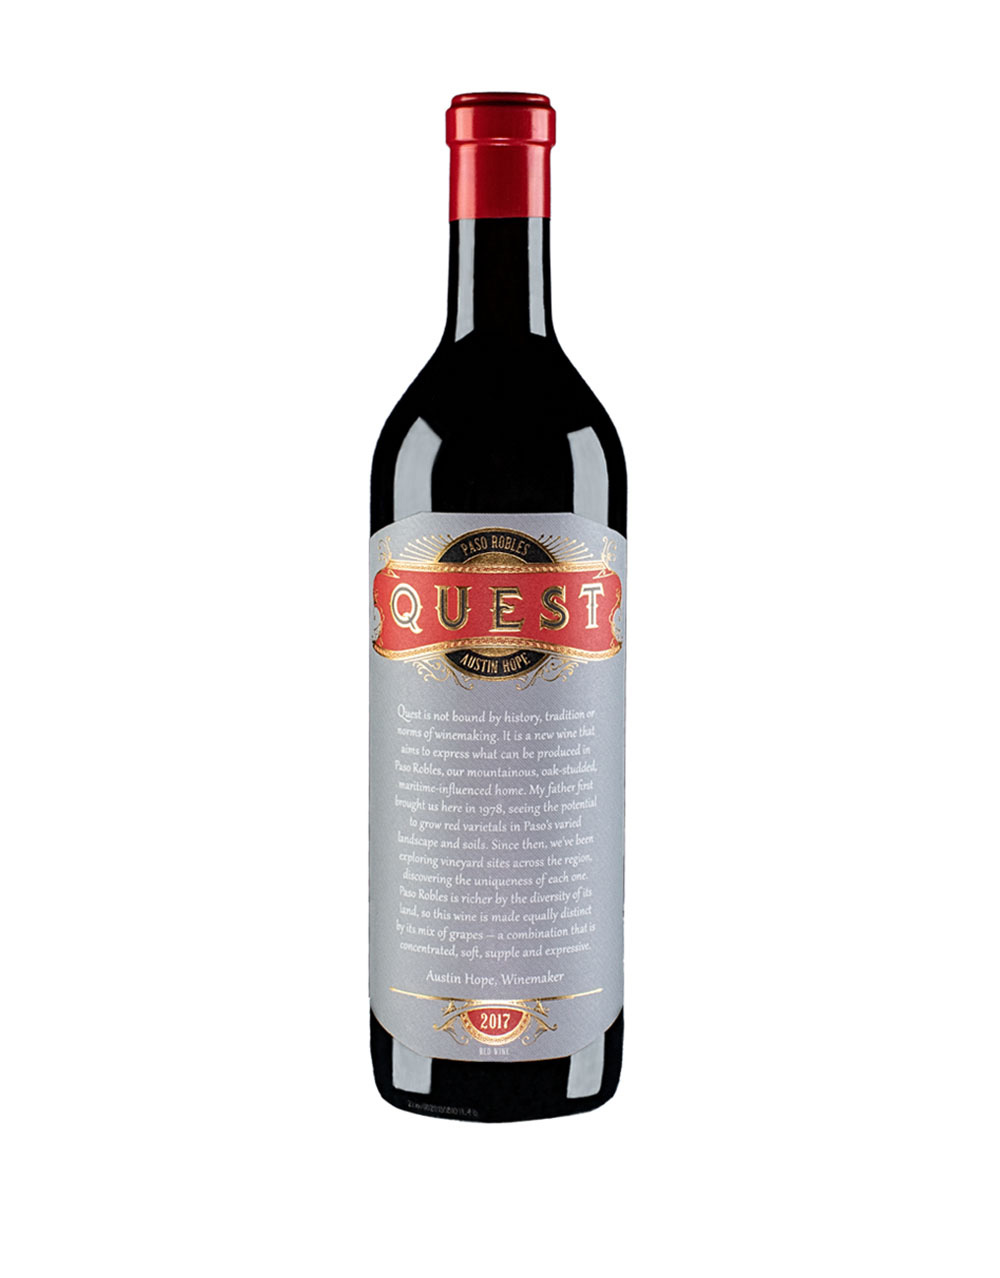 Quest Proprietary Red Blend 2017 Paso Robles